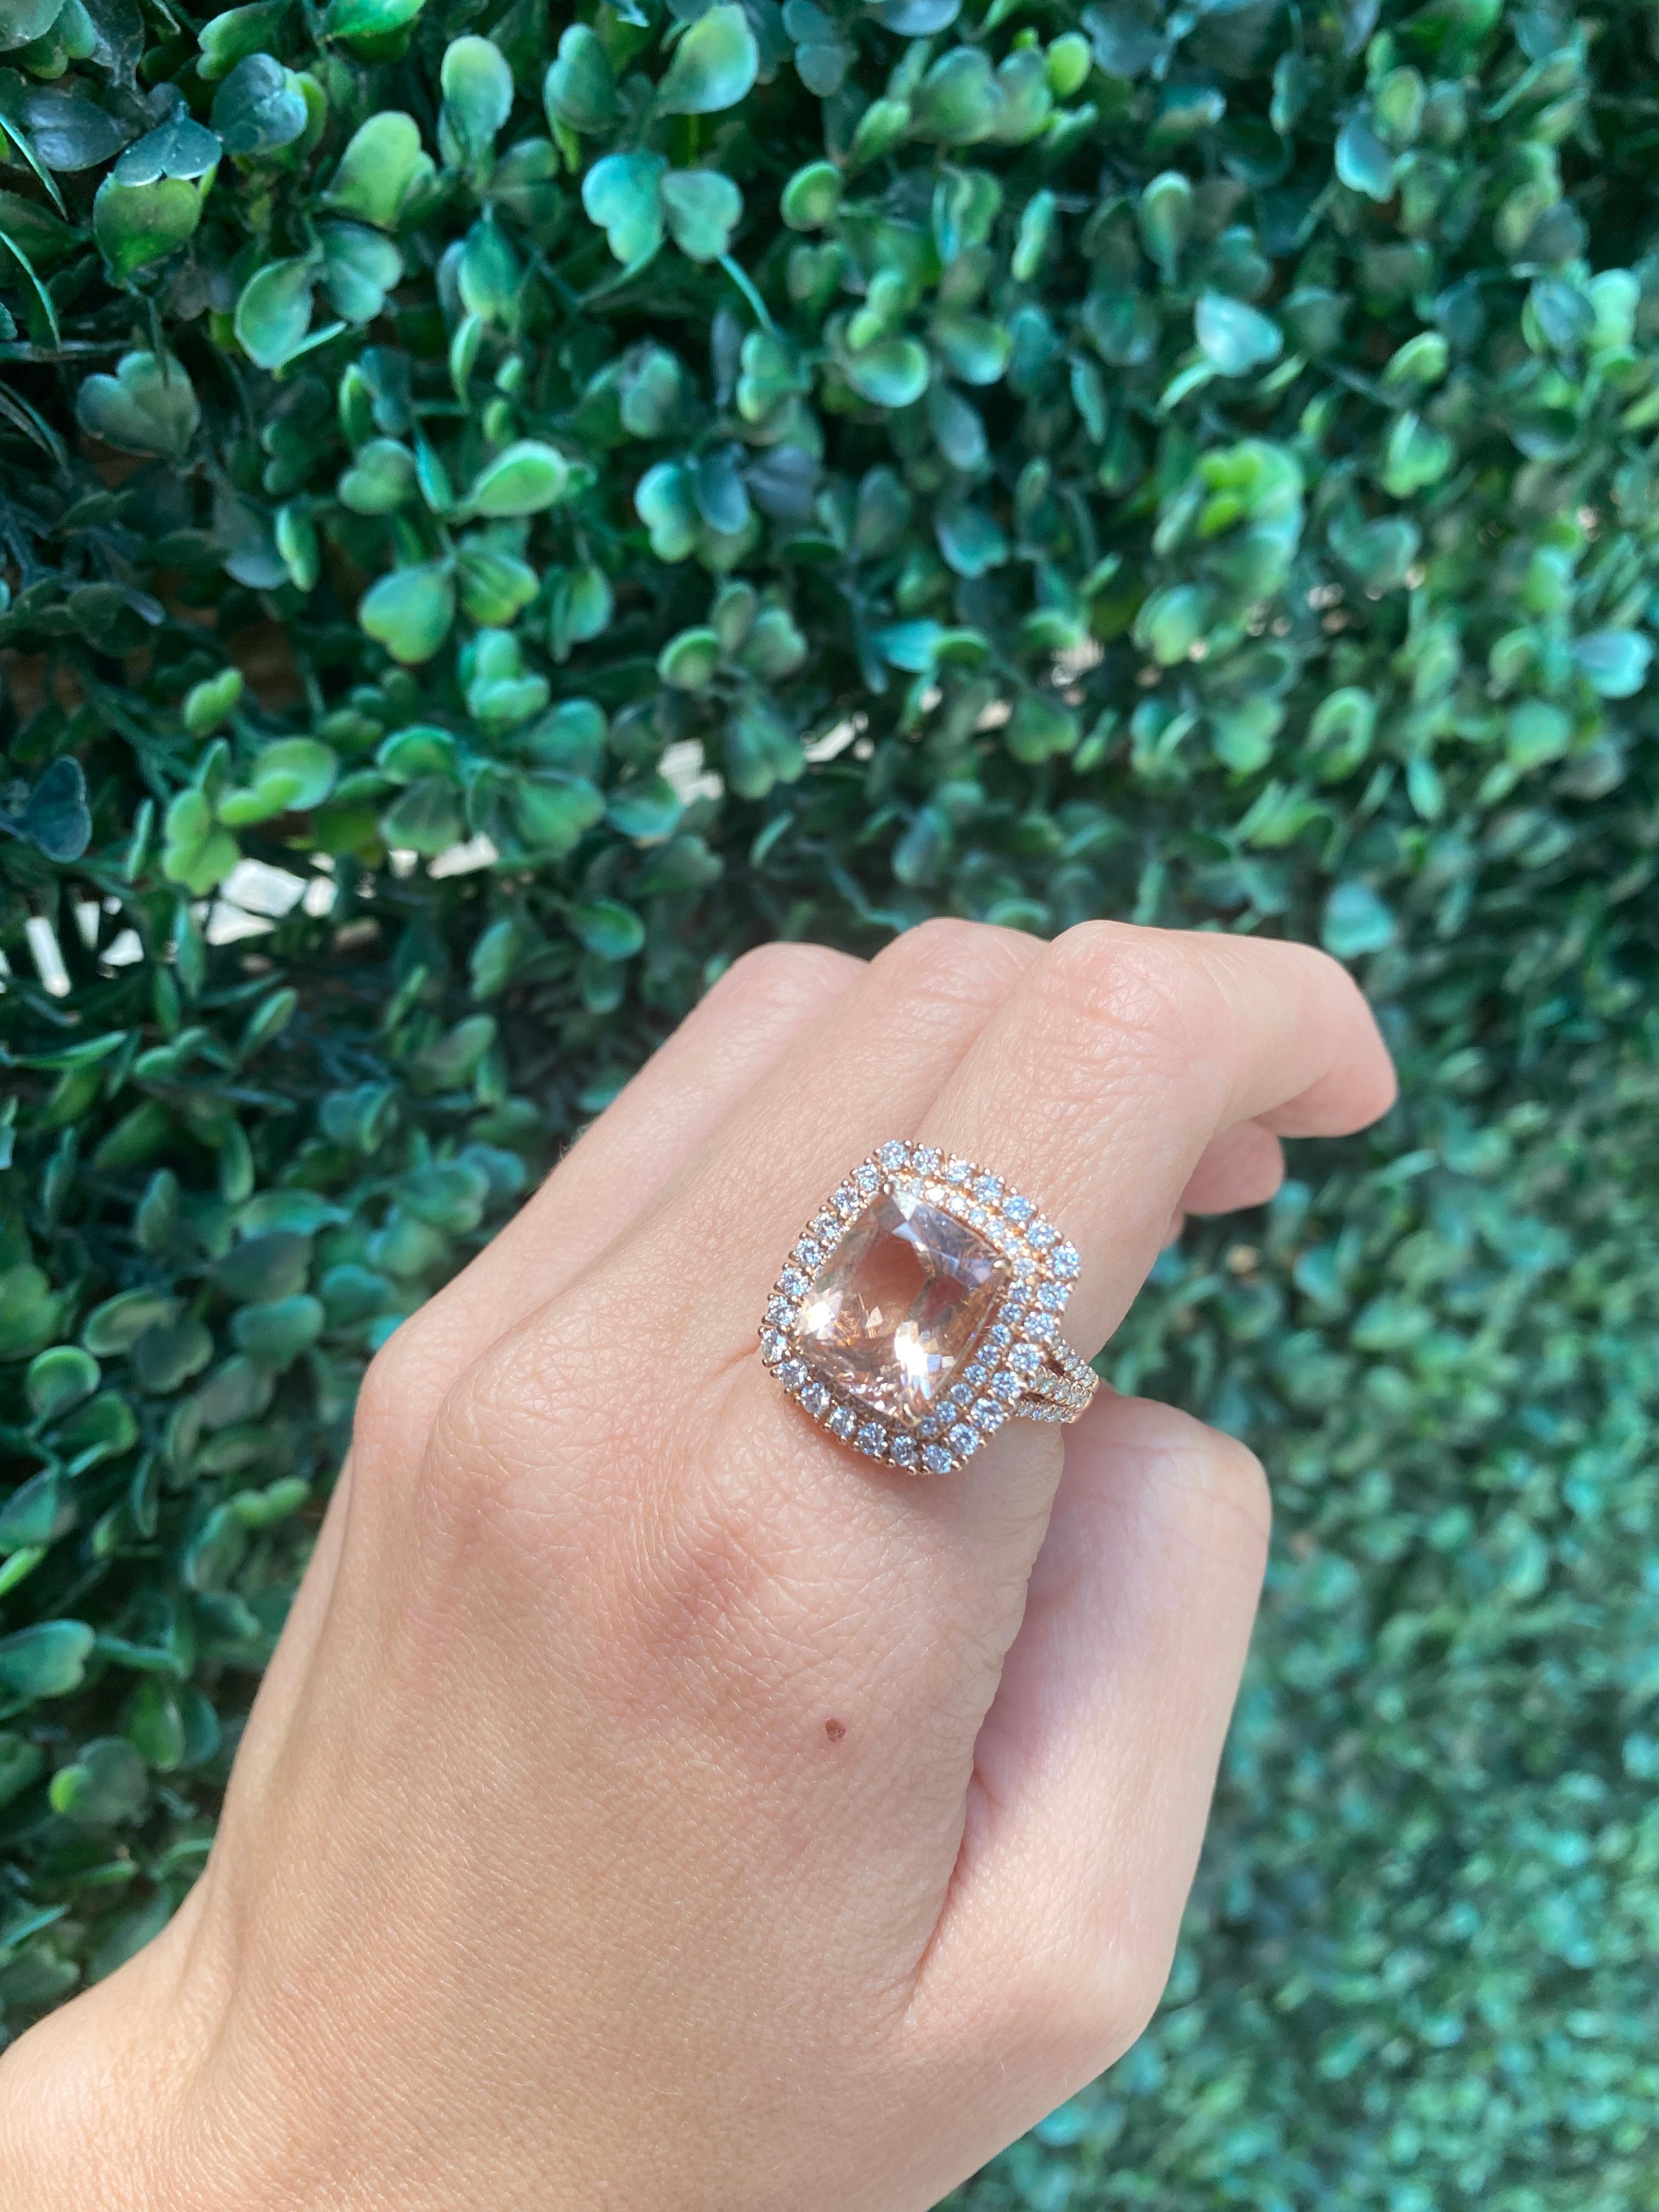 This triple shank cocktail ring features a 4.65 carat cushion cut morganite accented by 1.40 carat total weight in round brilliant diamonds set in 14 karat rose gold. This ring is a size 7 but can be resized upon request. 
Measurements: Morganite